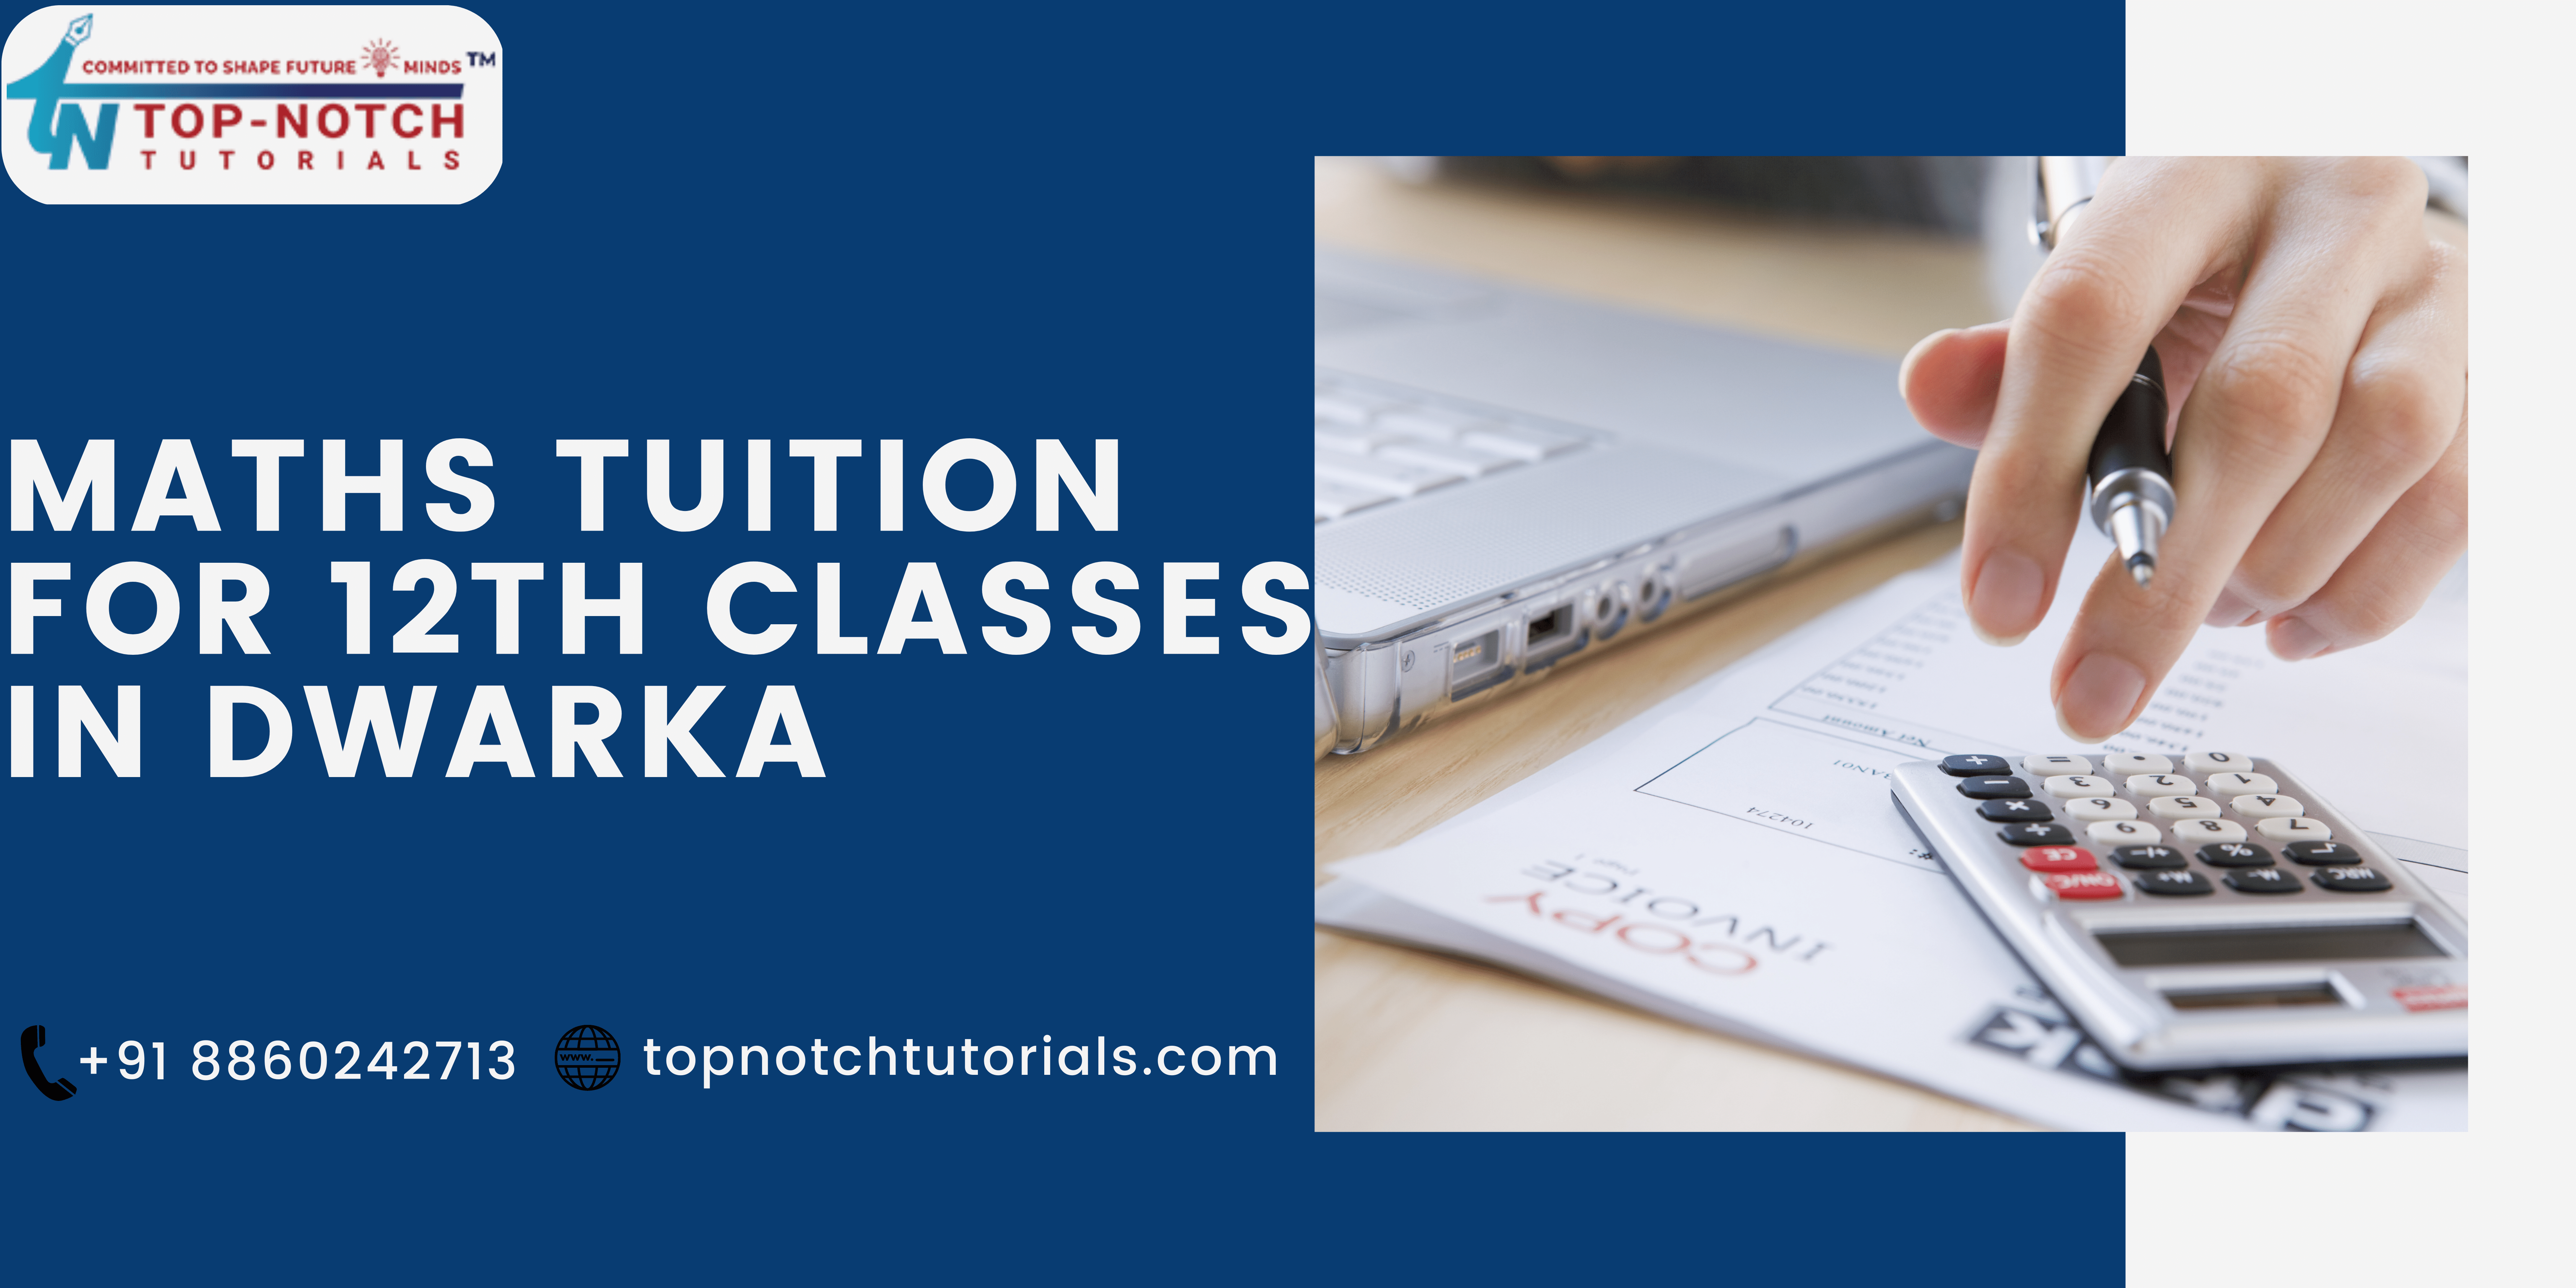 Maths Tuition for 12th Classes in Dwarka